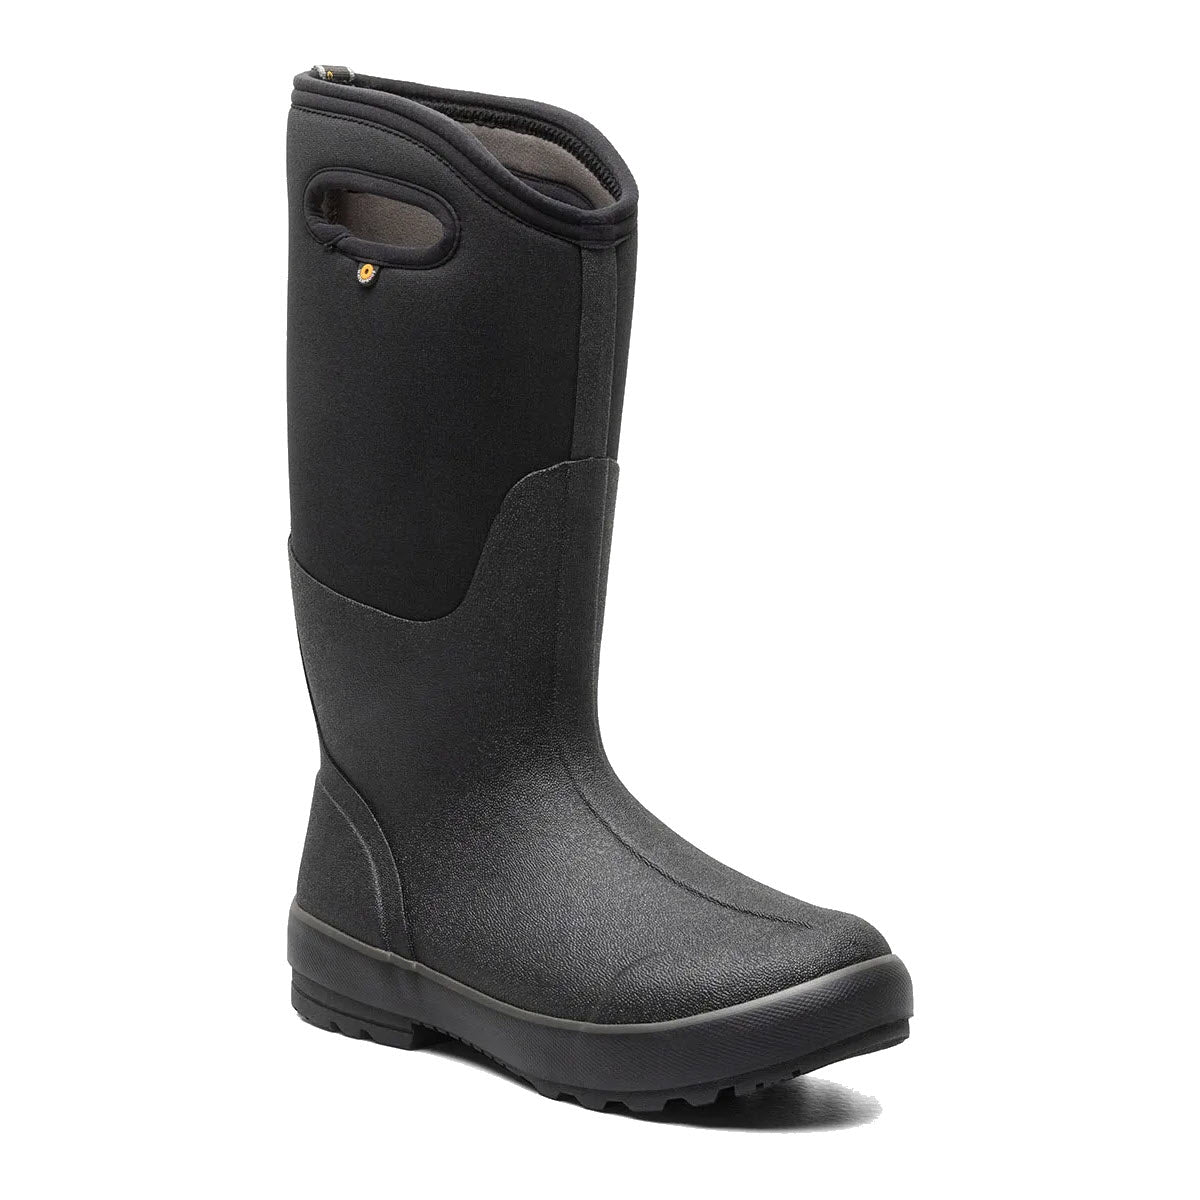 Tall black Bogs Classic Tall II Neoprene Boot with rubber sole and loop on the back for easy pulling on, isolated on white background.